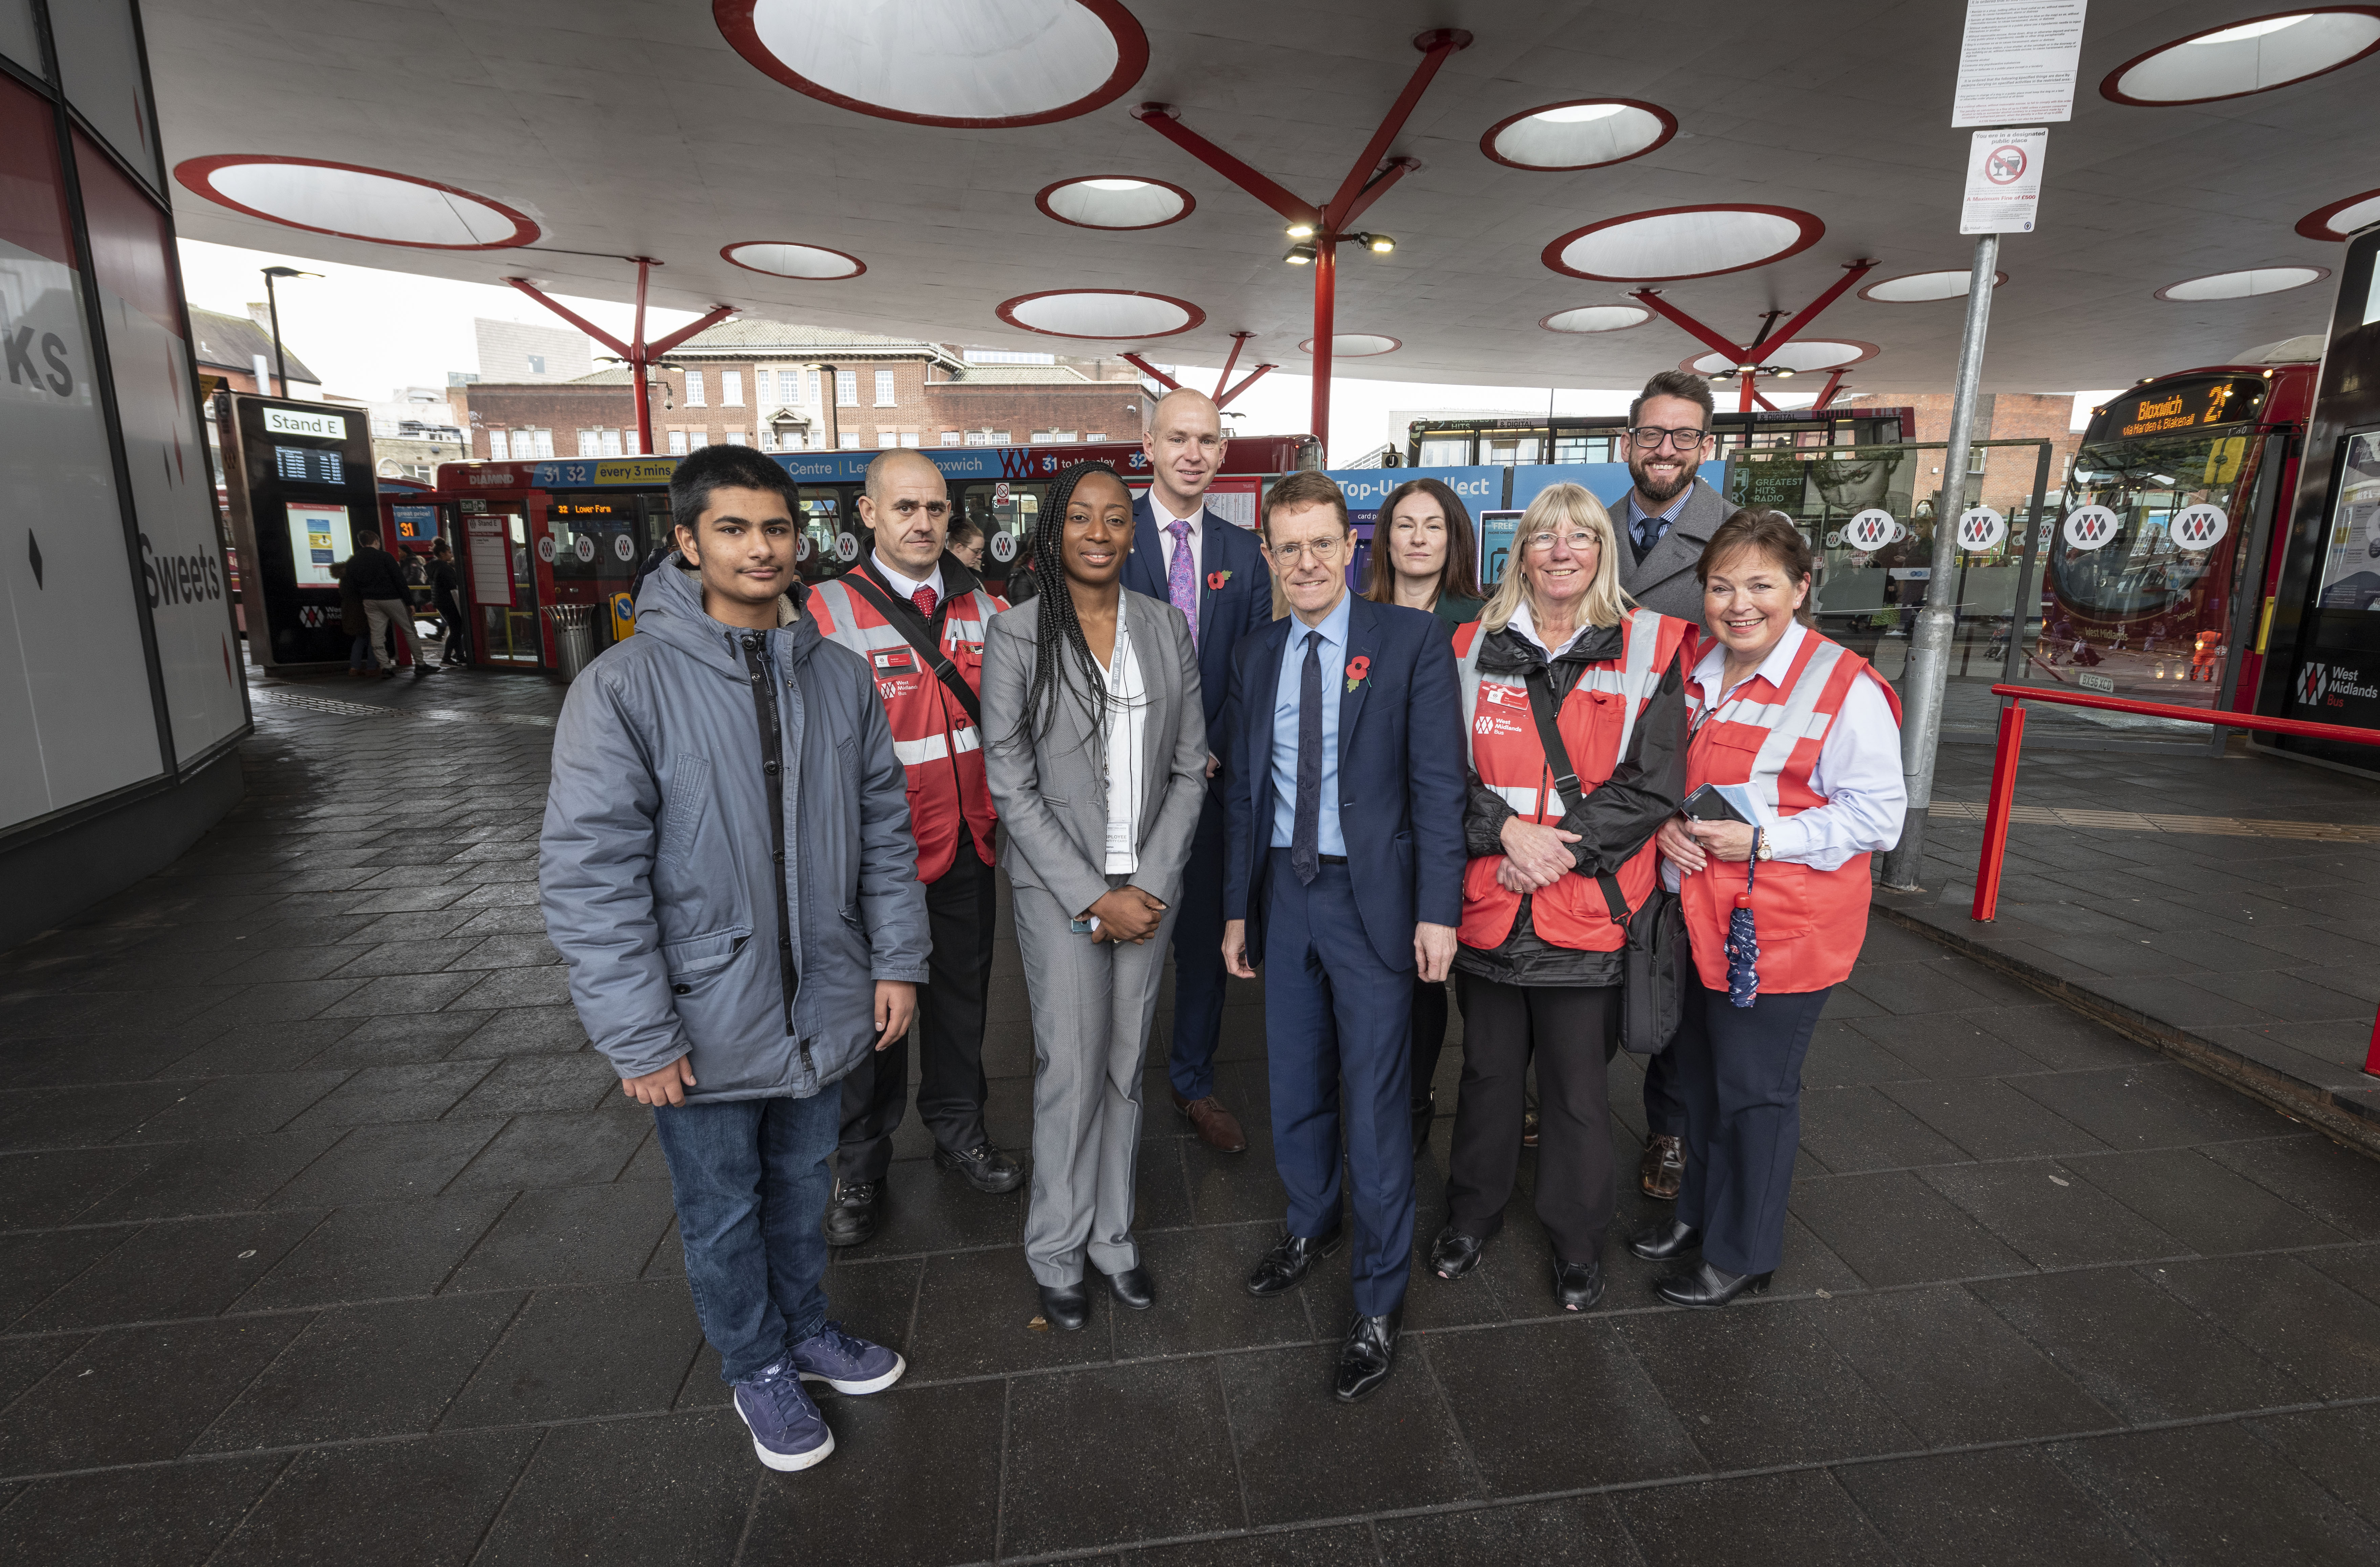 Asad Kalang (WM Young Combined Authority), Andrew Ward (bus station supervisor TfWM), Bukky Okusanya (project manager WMCA), Andrew Thrupp (operations manager TfWM), Mayor of the West Midlands Andy Street, Louise Collins (Transport Focus), Sue Tycer (bus station supervisor TfWM), Adam Rideout (National Express), Sue McCormack (bus station manager TfWM)